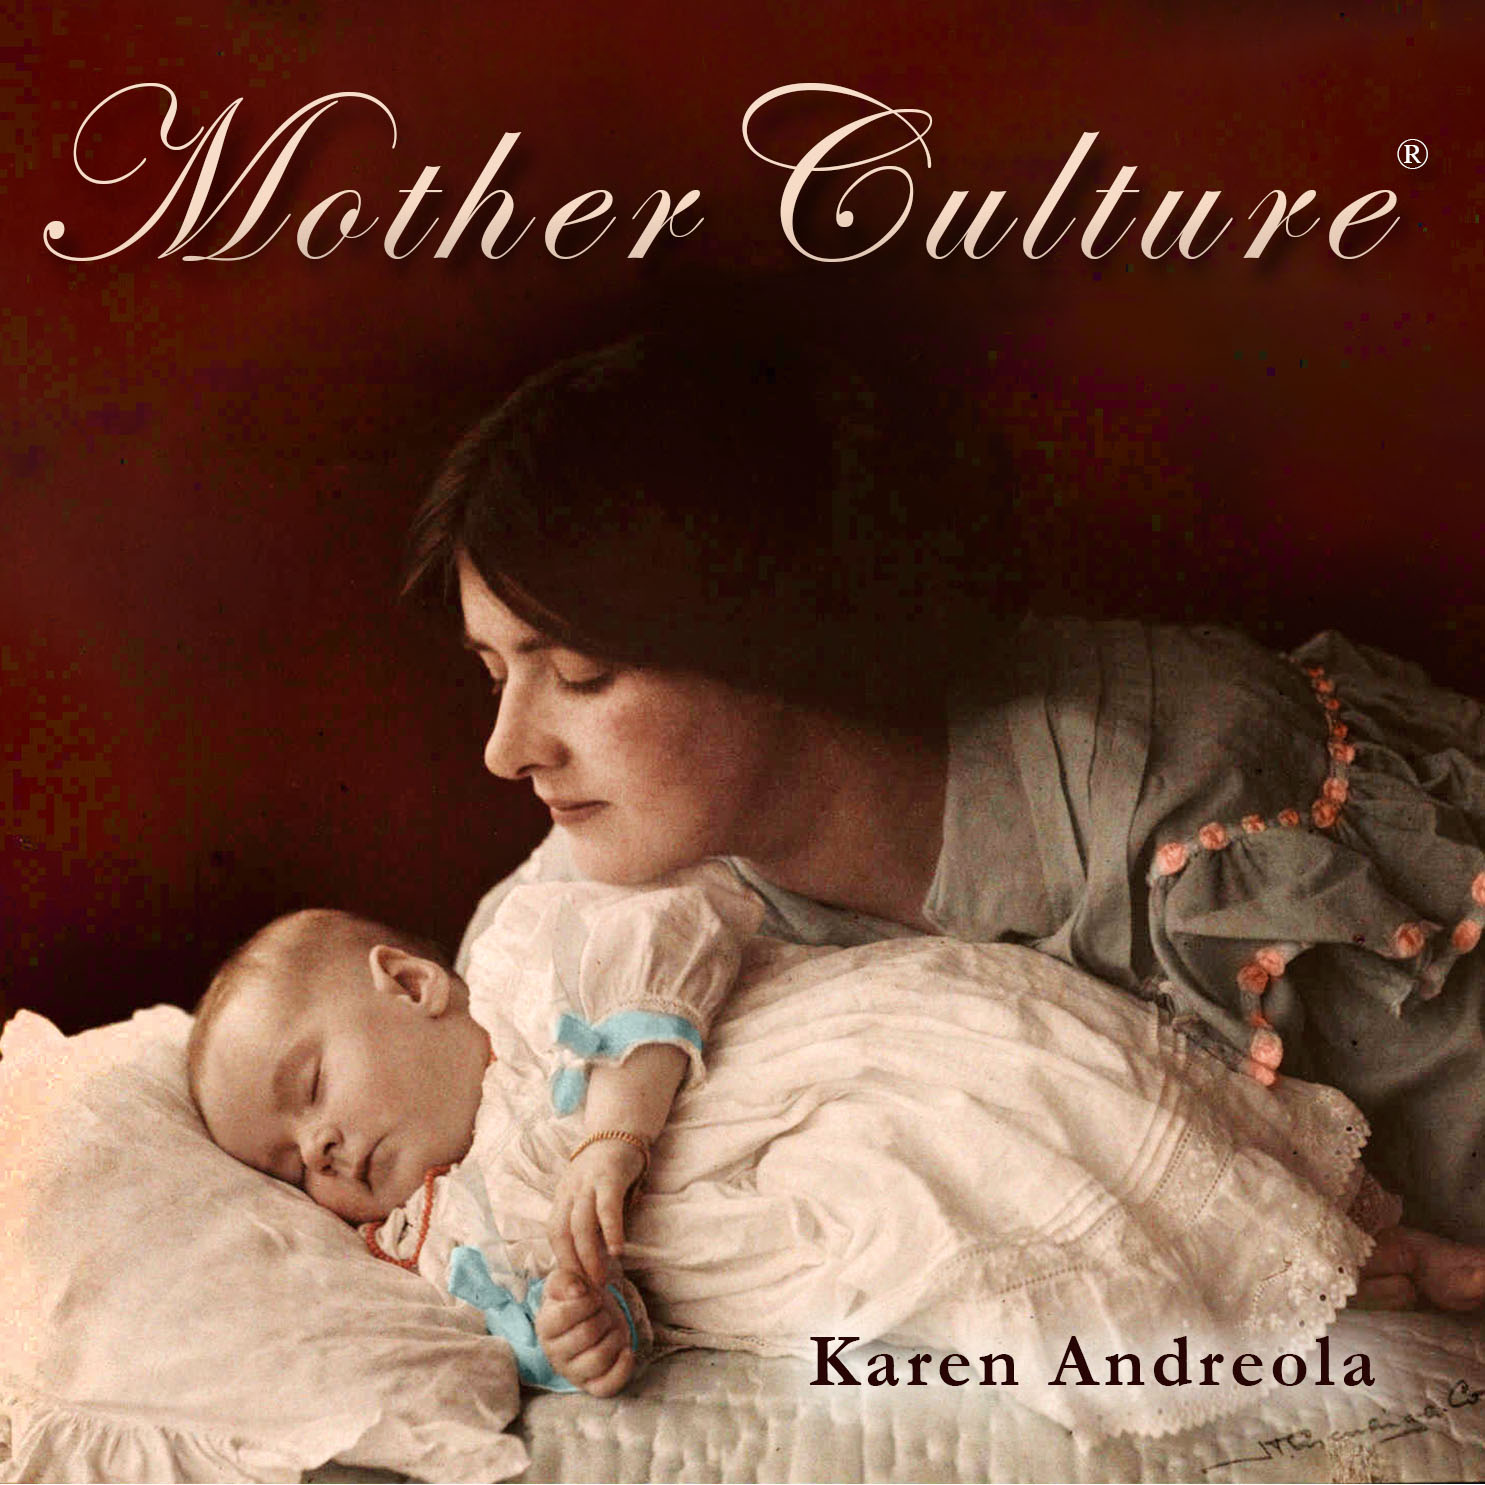 Mother Culture® is a registered trademark